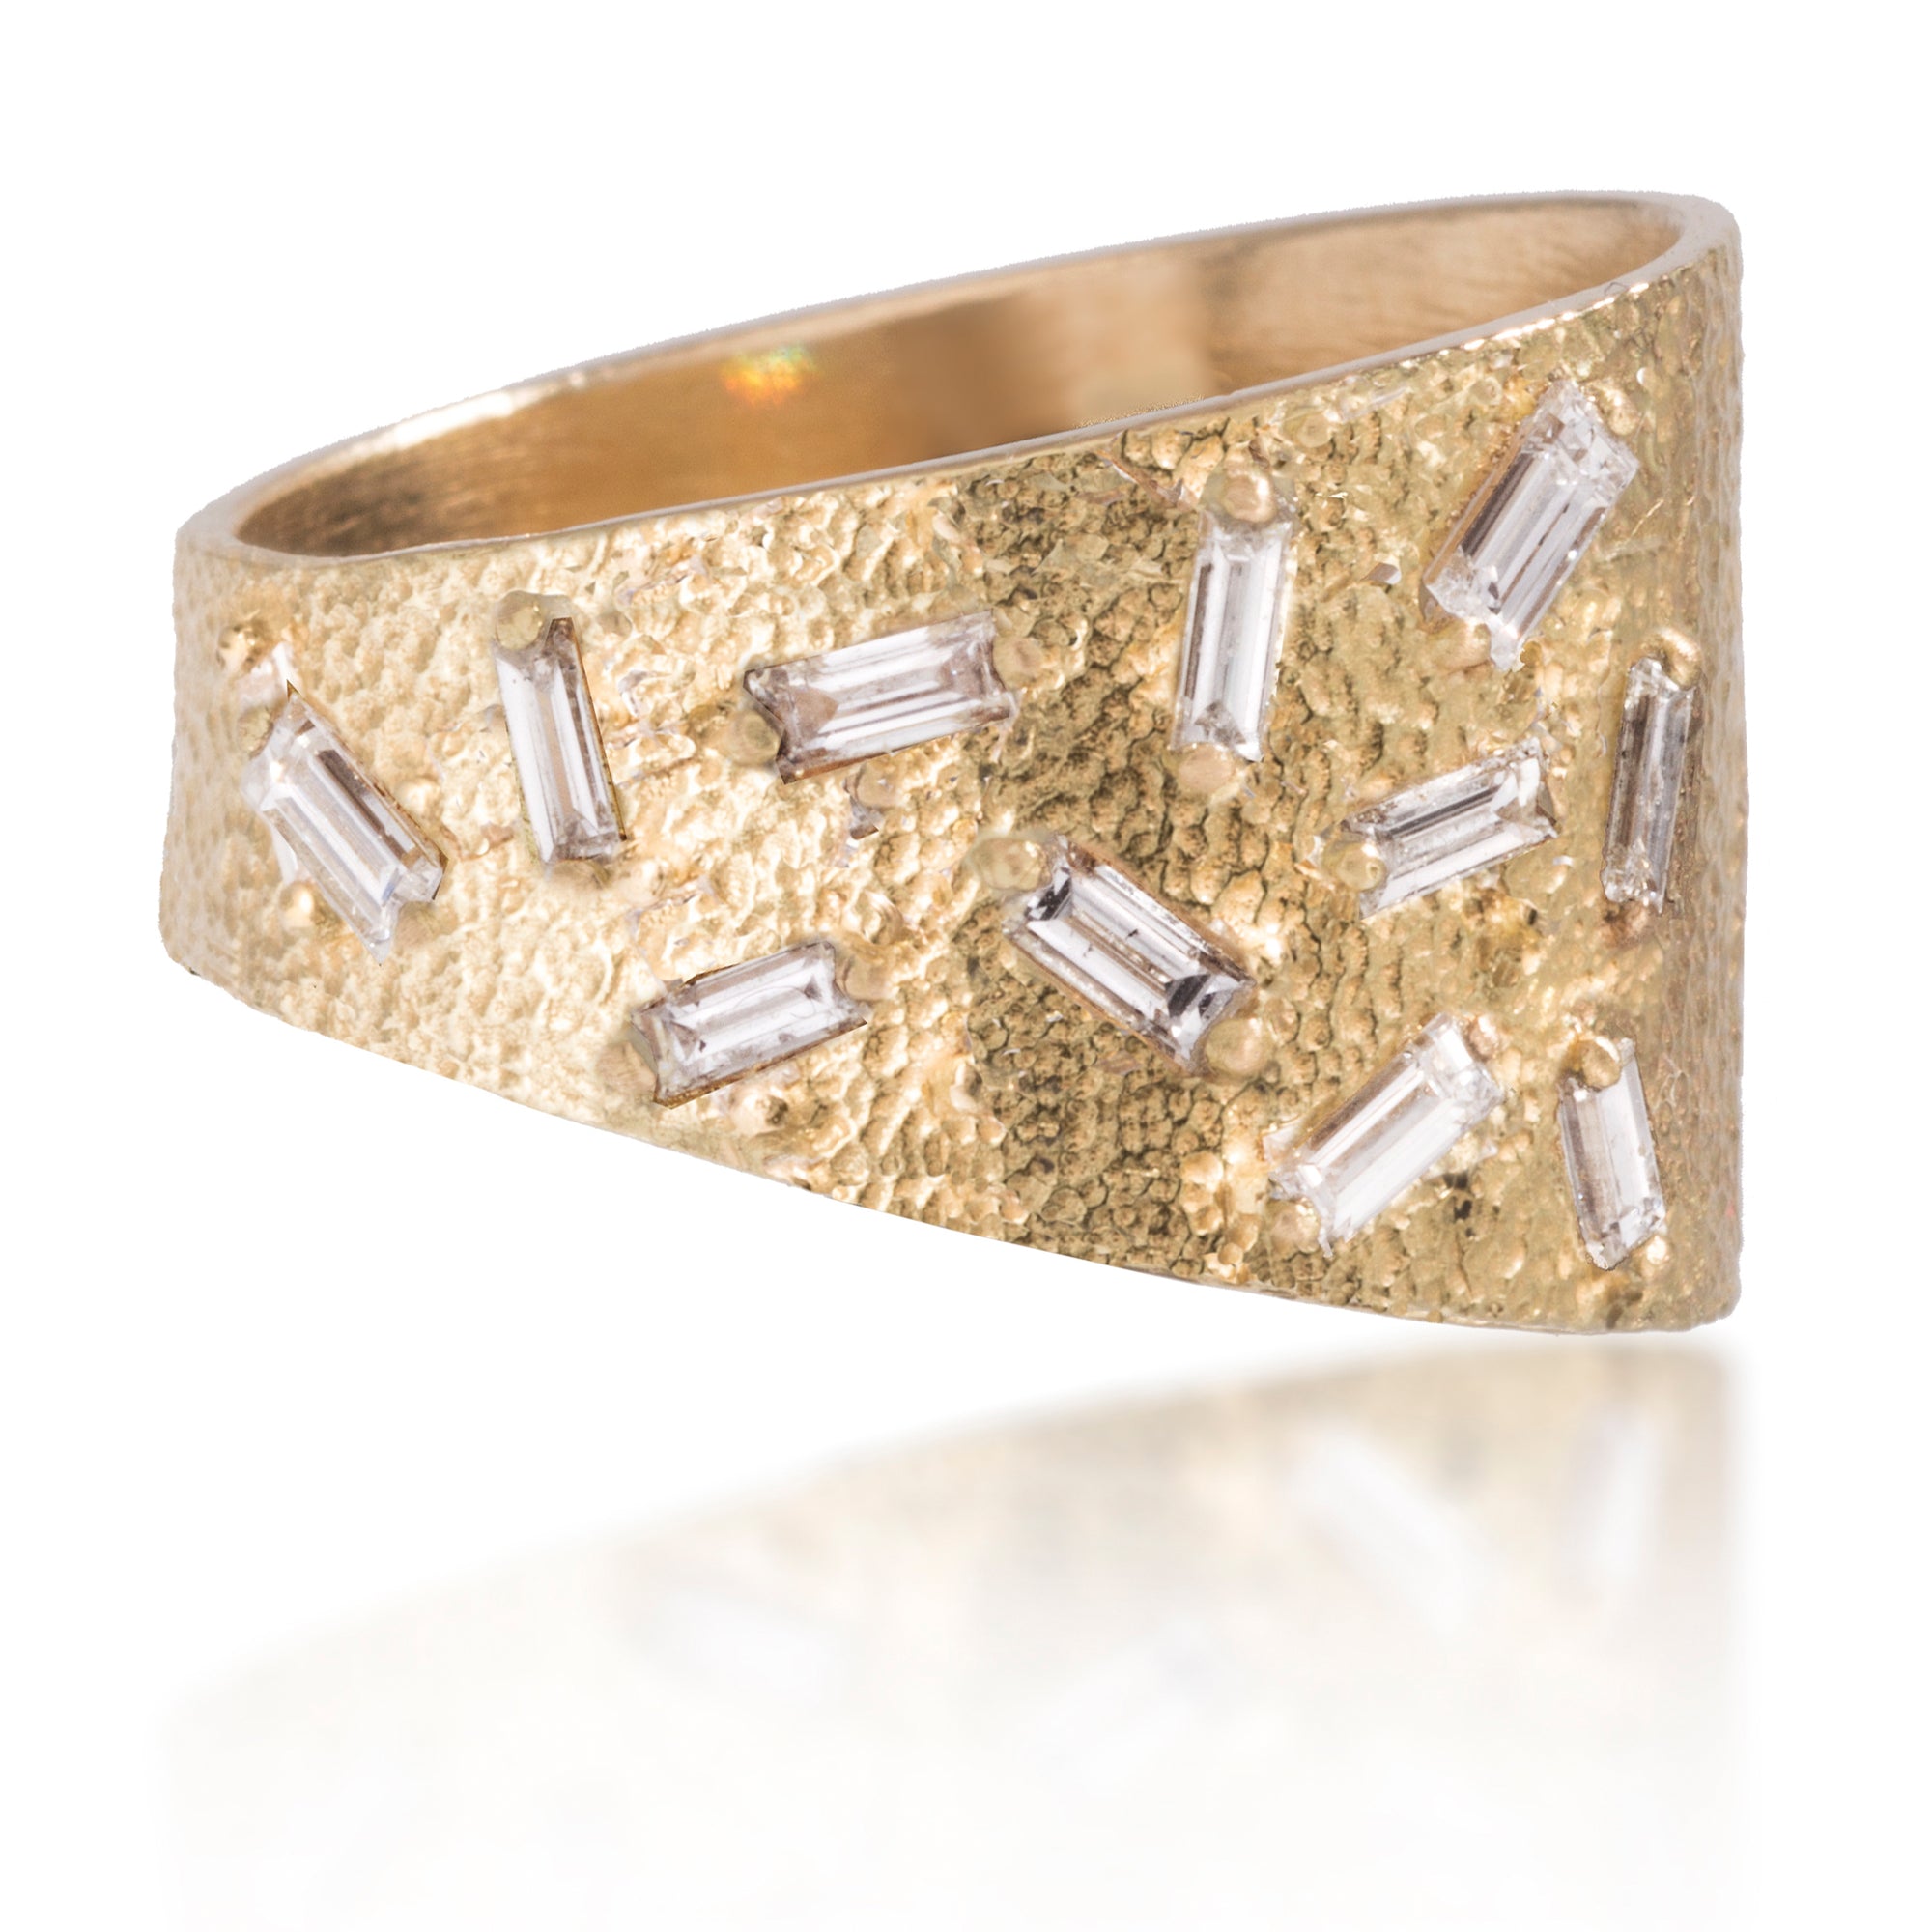 This tapered wedge style ring is set with 11 white diamond baguettes.  It is available in three richly textured color ways, oxidized silver, 18k gold and palladium. 0.36 tcw.